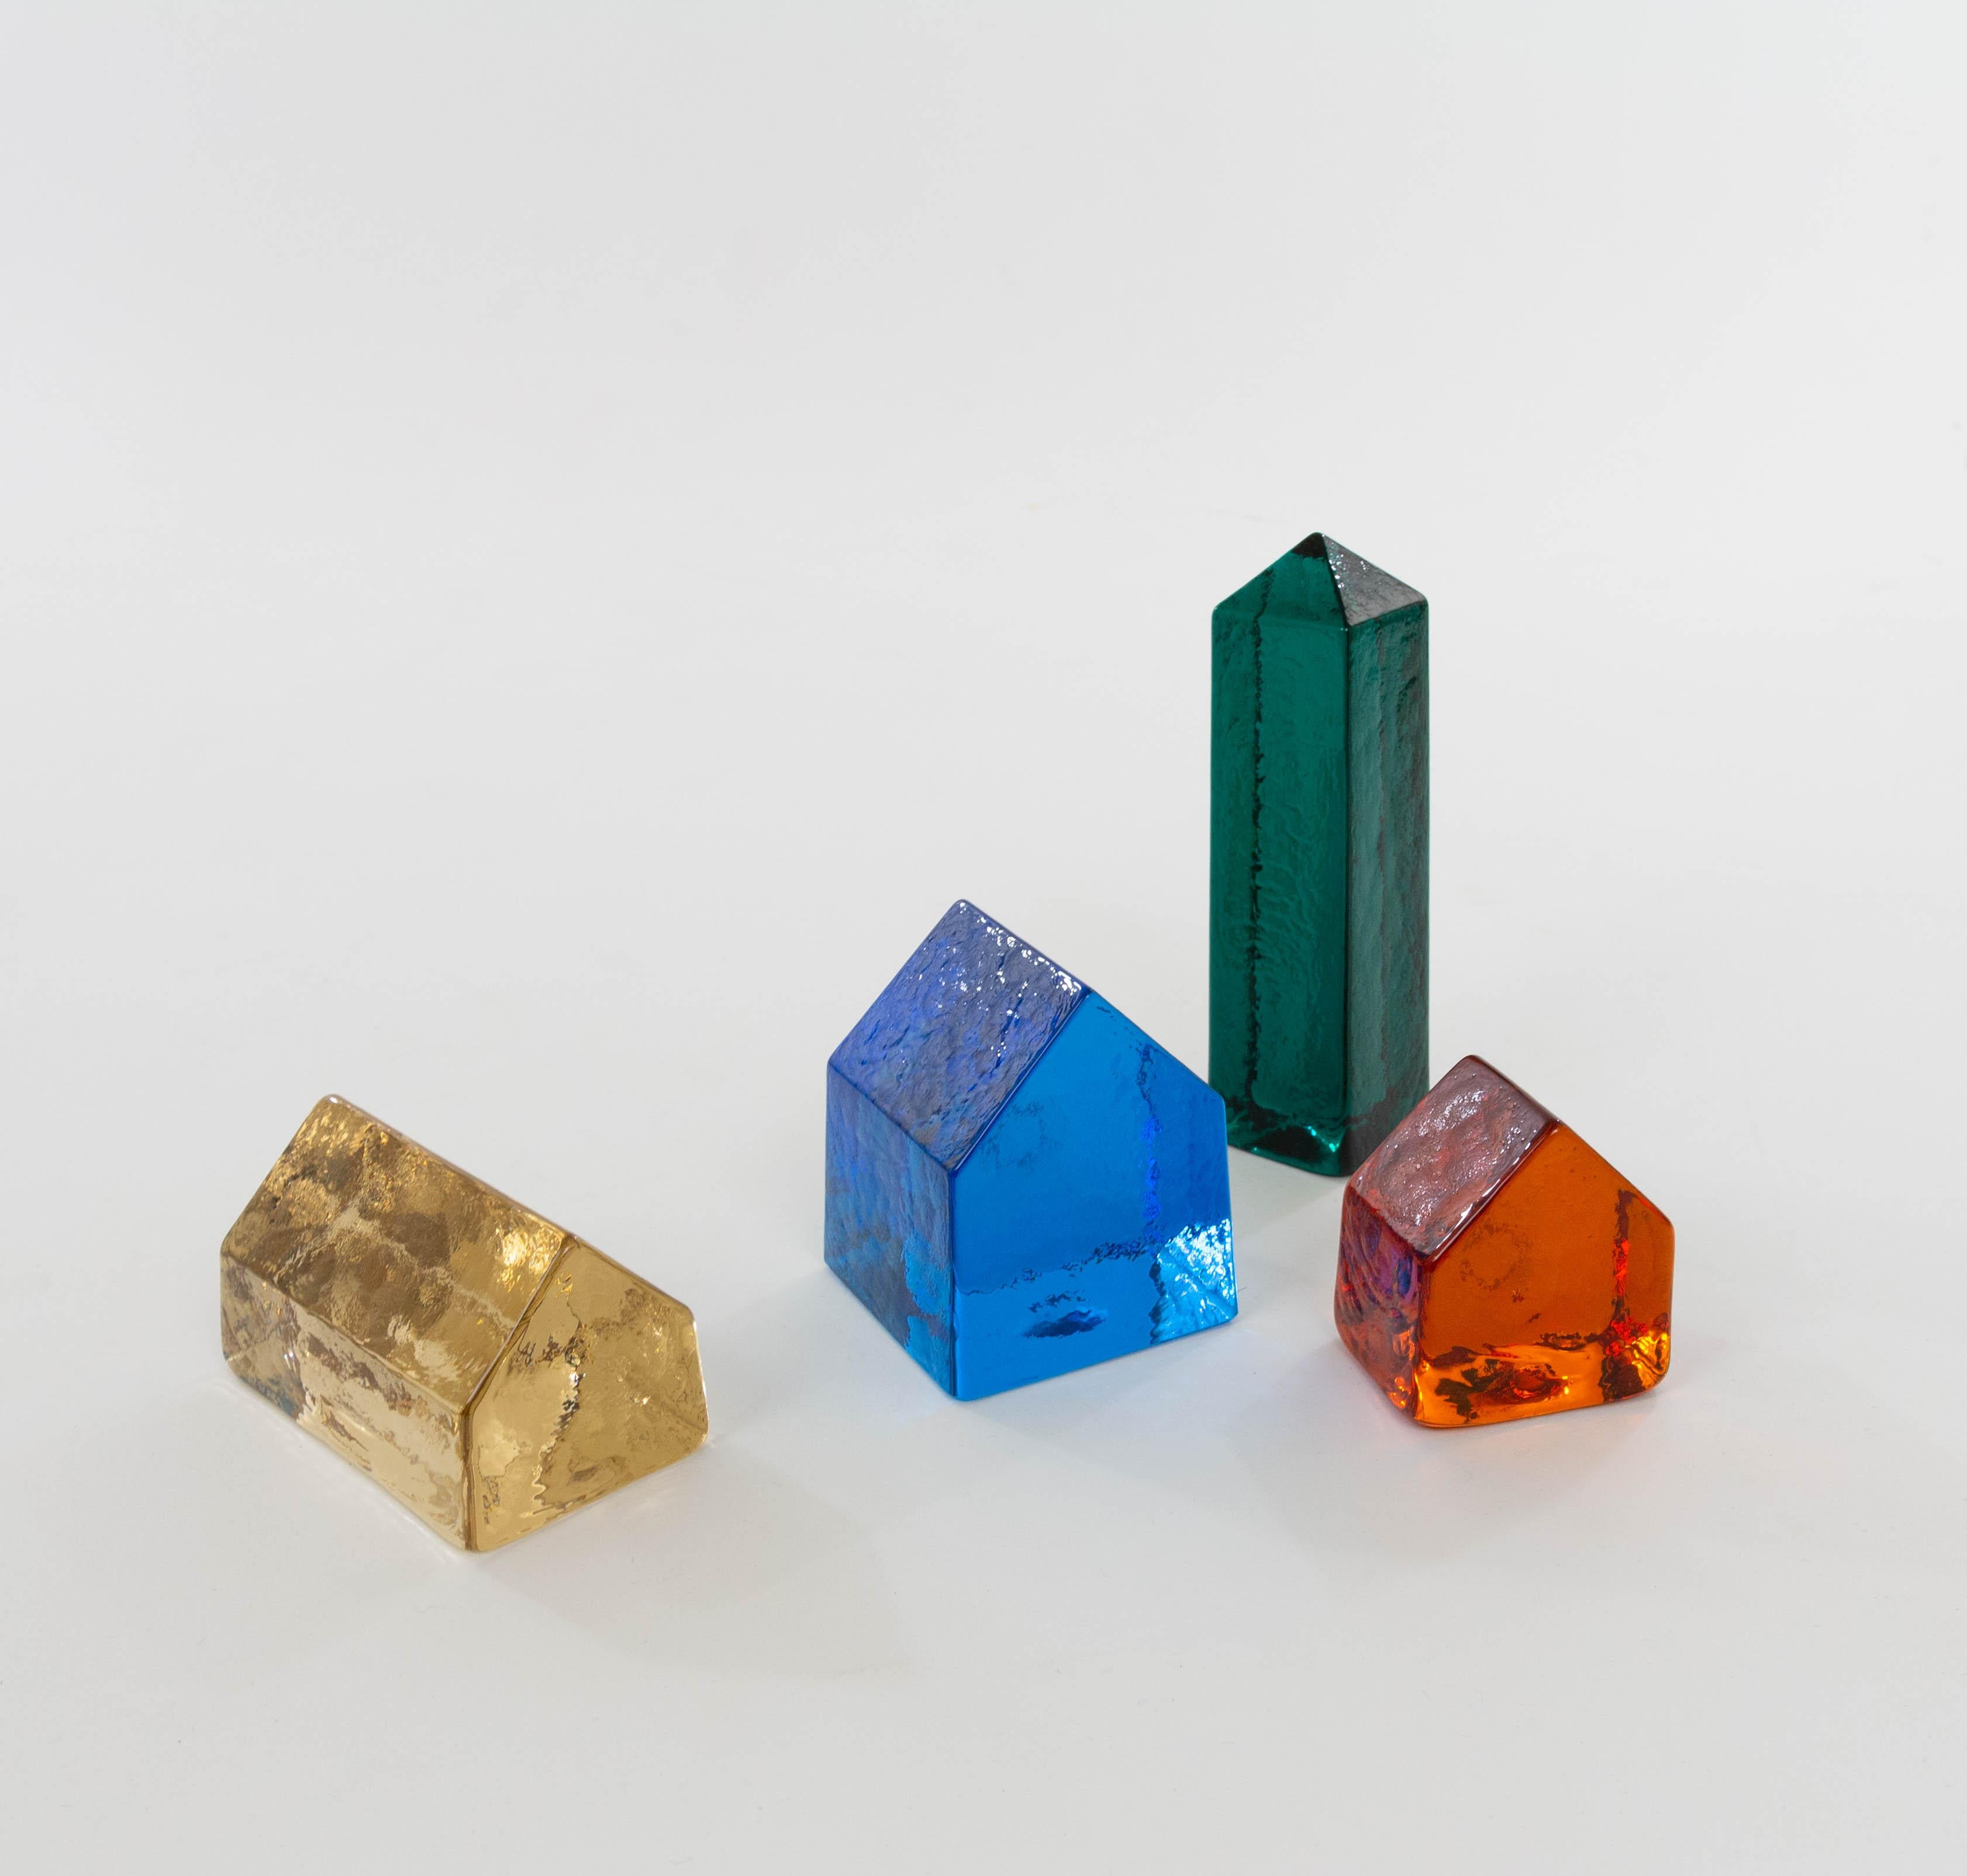 Carlo Nason designed these objects in the 1970s for V.Nason&Co, the company of his father Vincenzo Nason.

They are made of Murano glass in four striking colours. The items could be used as decorative objects or as paperweights.

This set consists